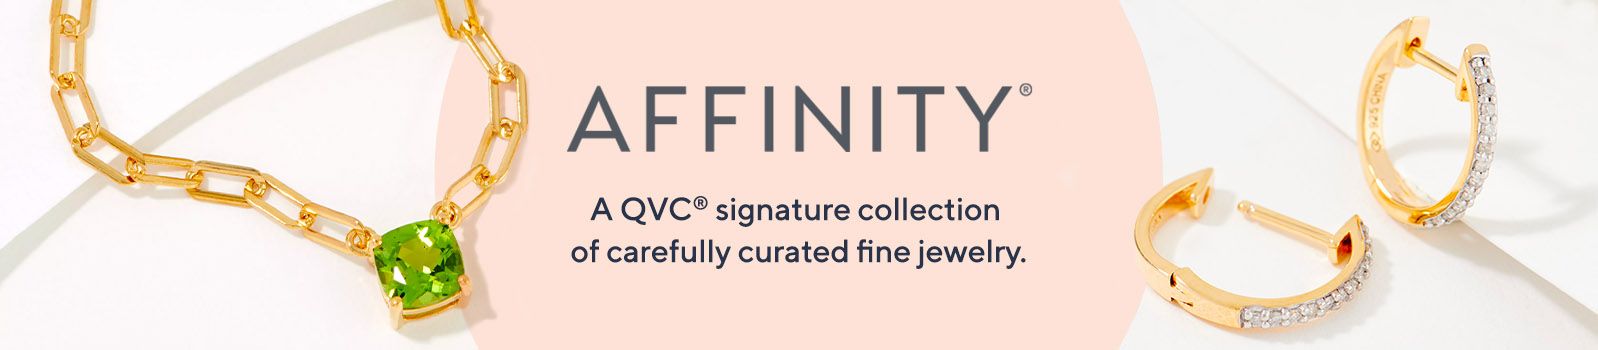 Affinity® - A QVC® signature collection of carefully curated fine jewelry.